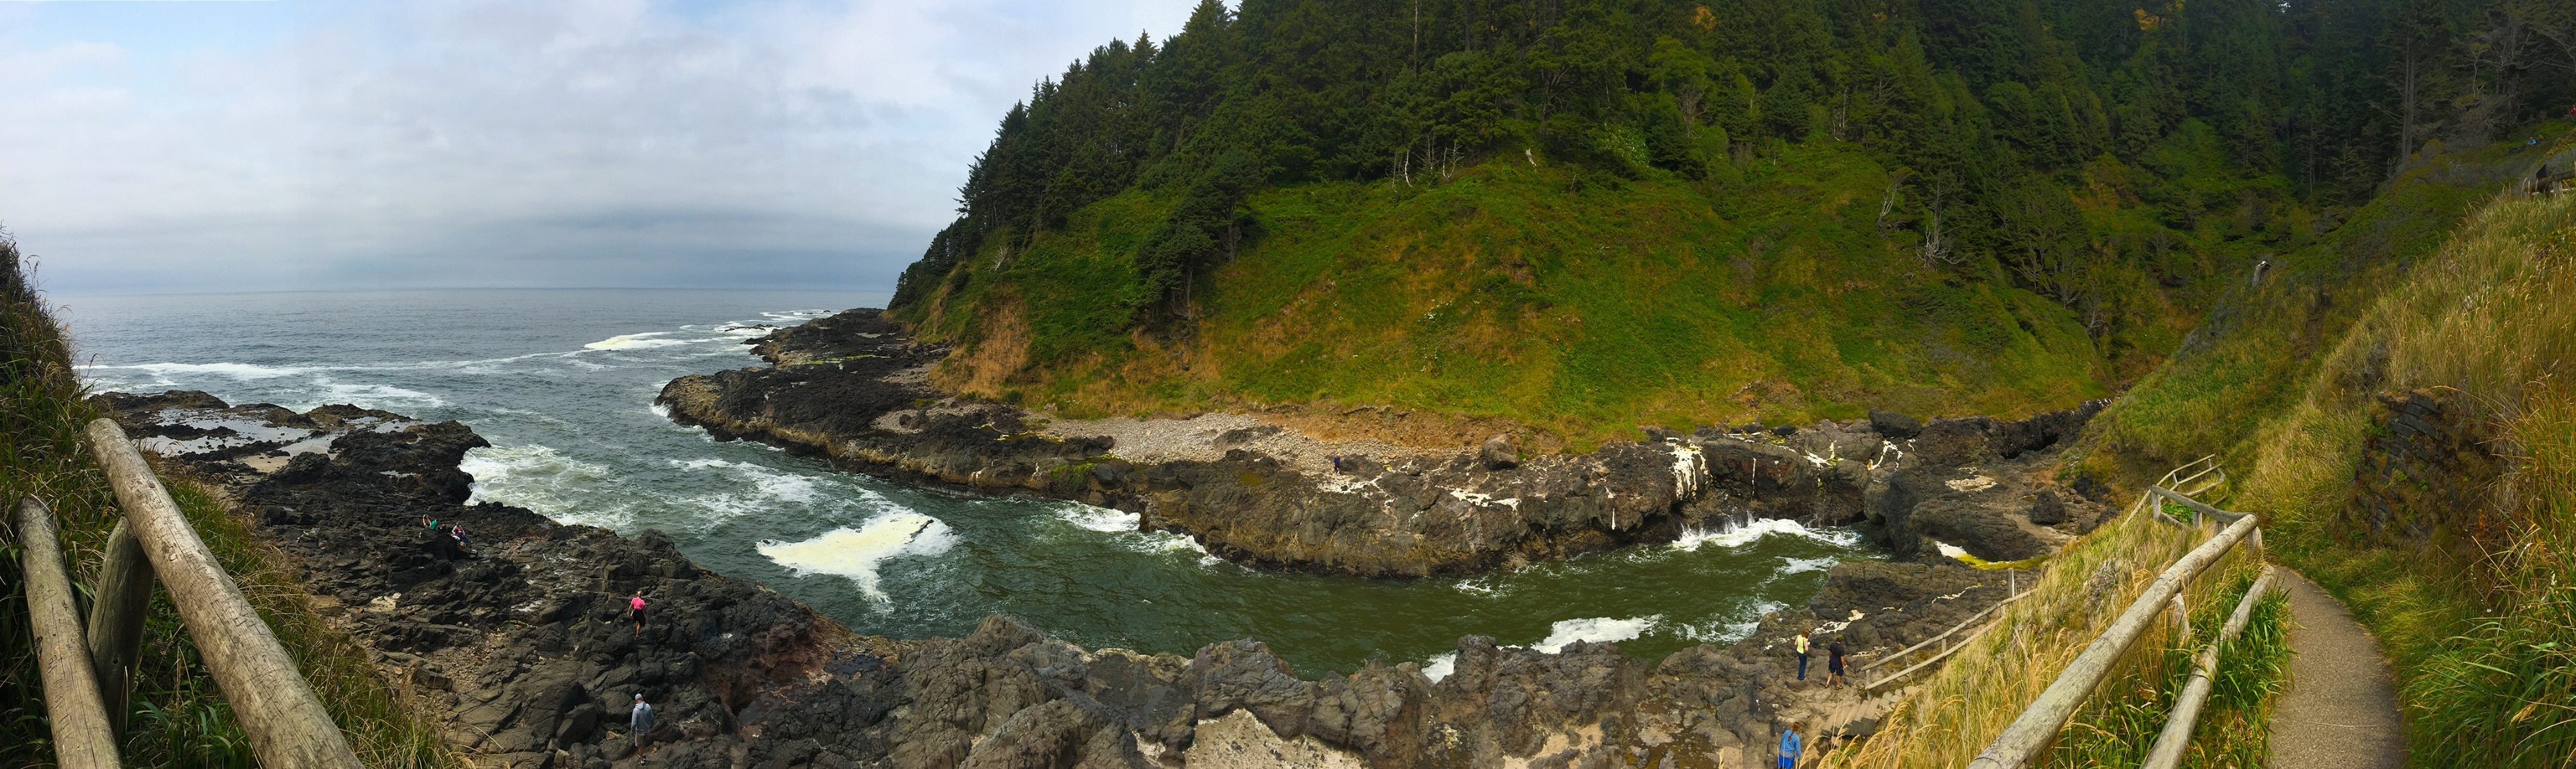 Stopped for a hike along the Oregon Coast Highway. Not too far of a drive from our camp in Newport. Plenty of tide pools to explore.